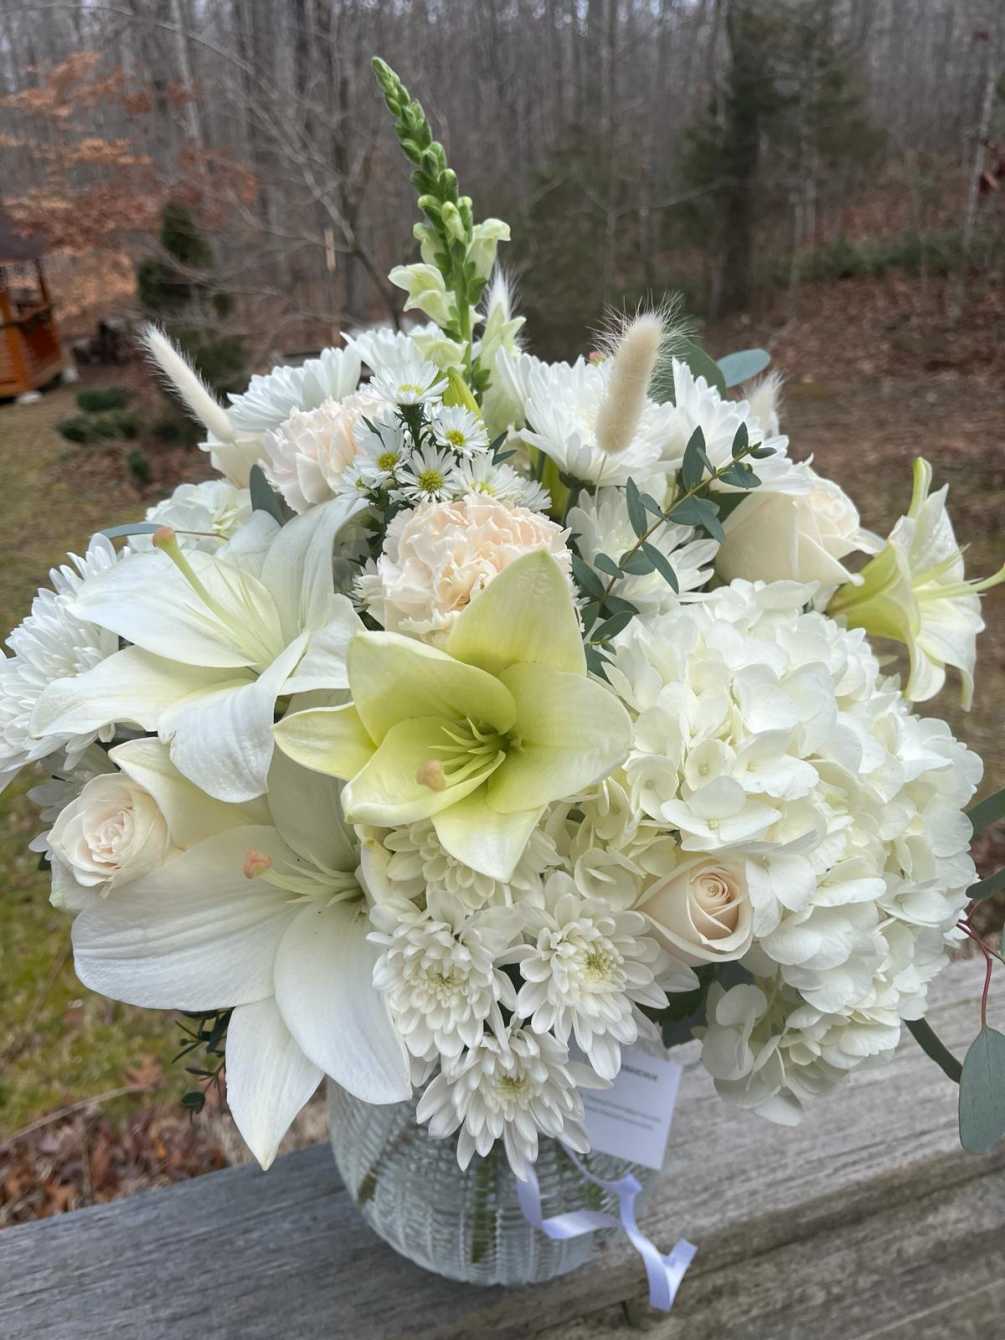 Embrace the timeless beauty of a Moonlight Sonata. This elegant bouquet features